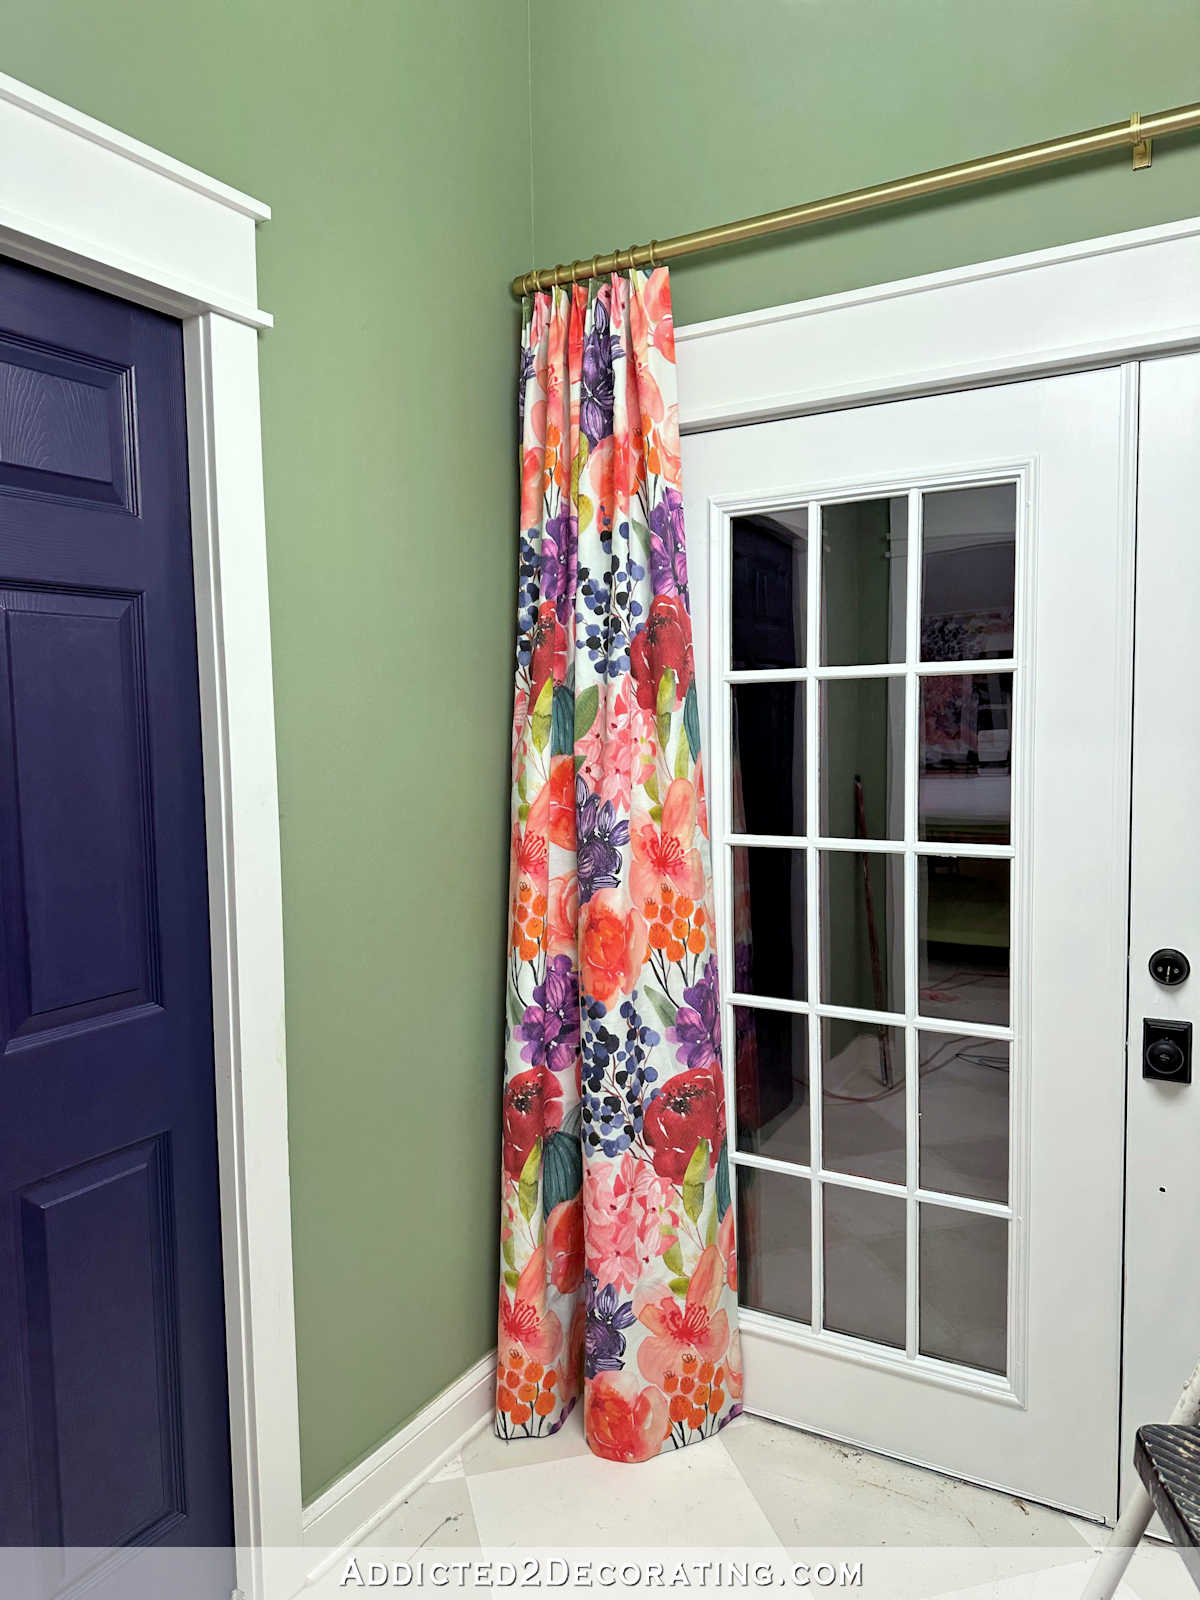 How To Make Lined Pinch-Pleat Curtains, Part 2